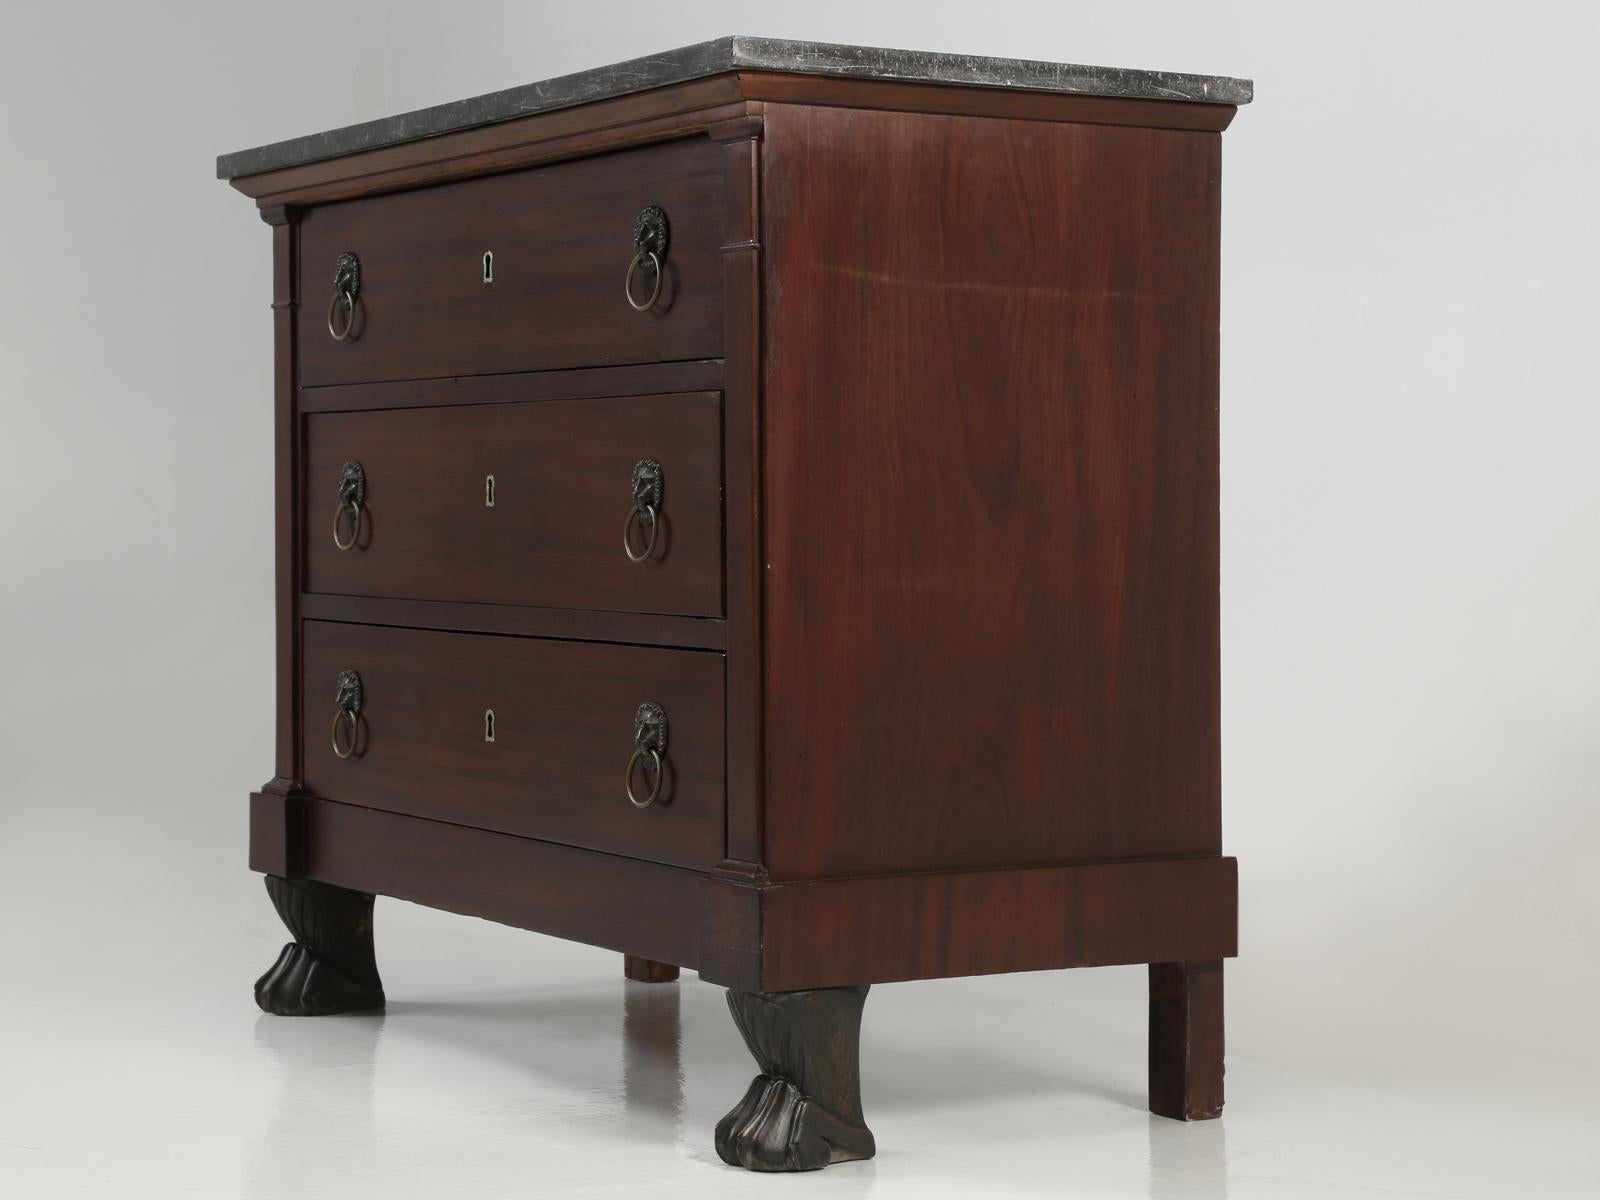 Antique French Empire style Commode or some may describe our Lion Paw Foot Commode as from the Restauration period, which was predominantly Neoclassicism. Our Old Plank restoration department completely rebuilt the drawers and the entire frame, but